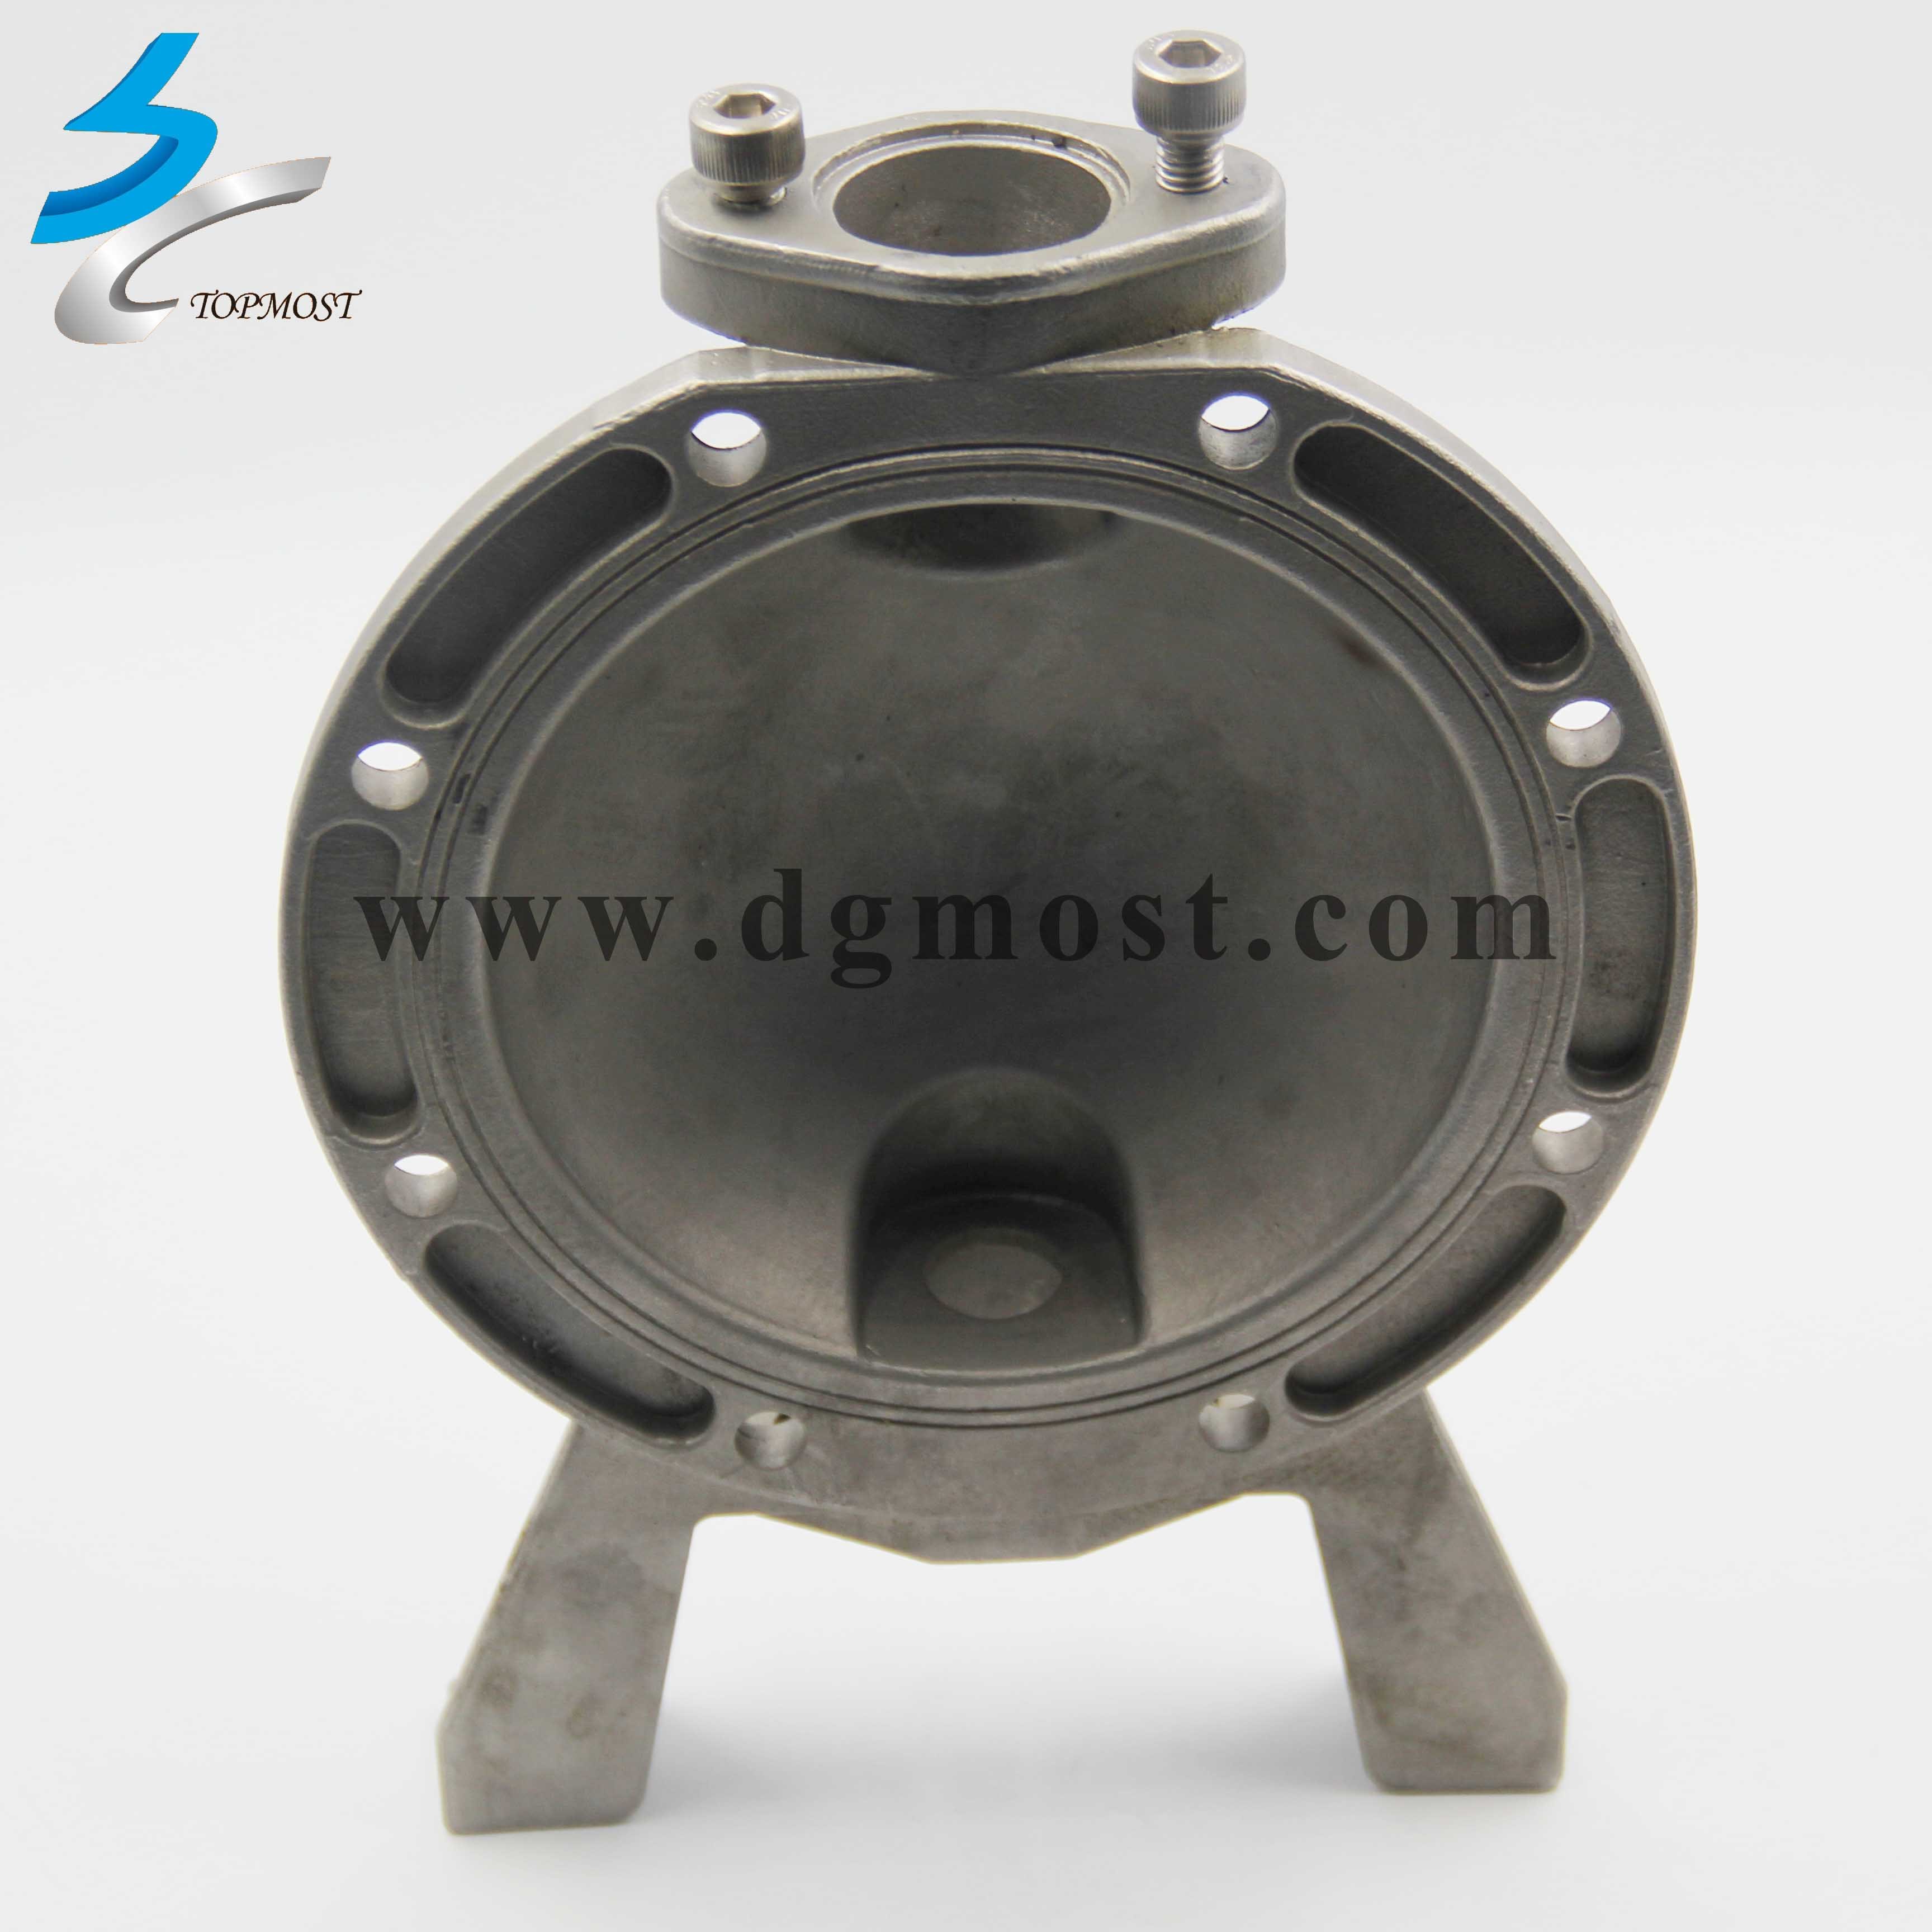 Casting Hardware Stainless Steel Customized Valve Parts